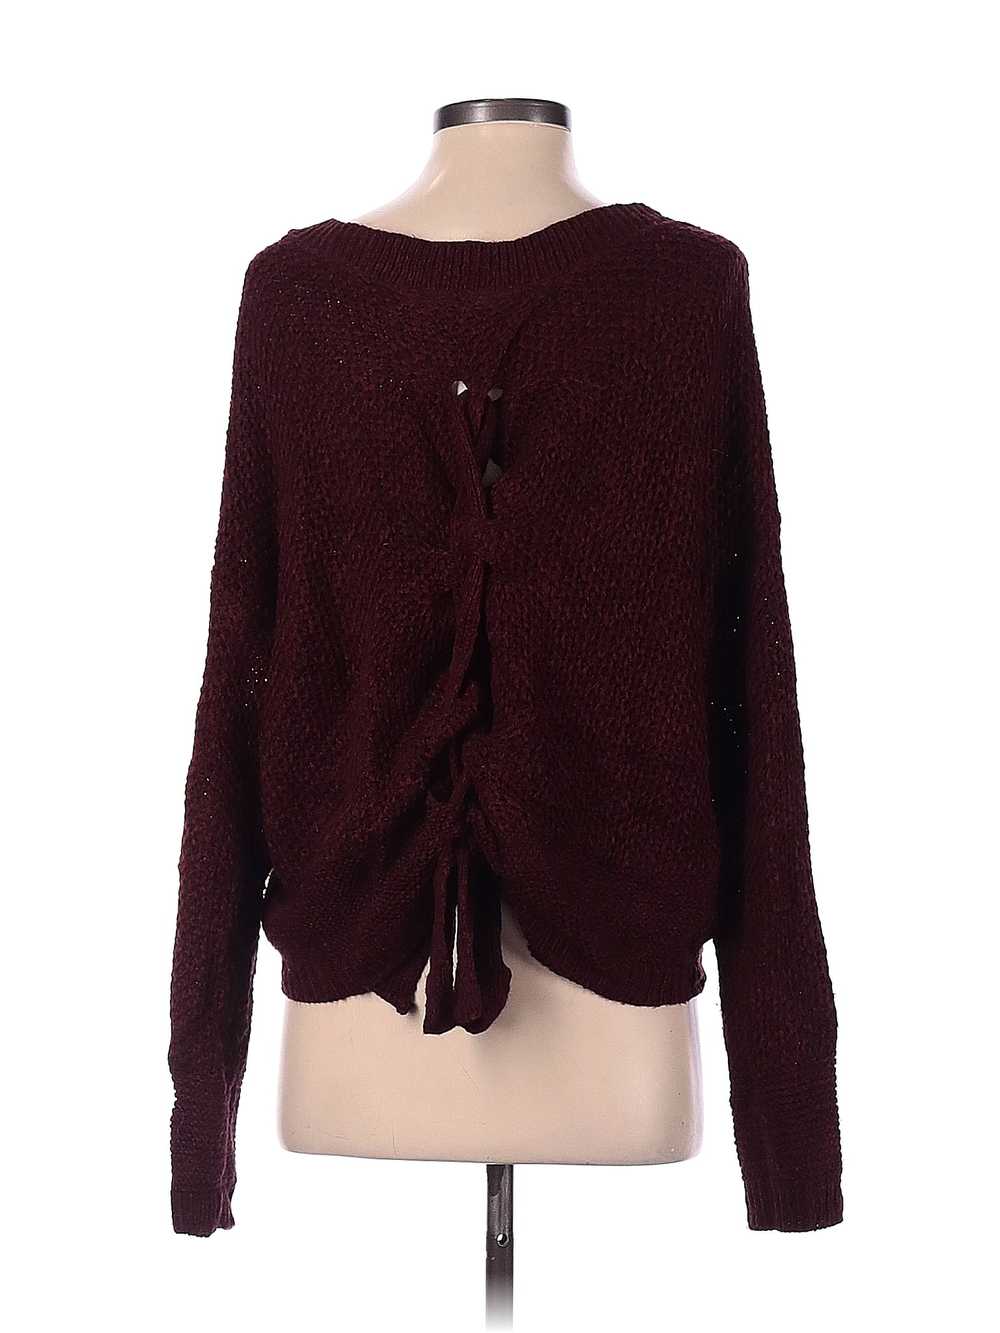 Express Women Red Pullover Sweater S - image 2